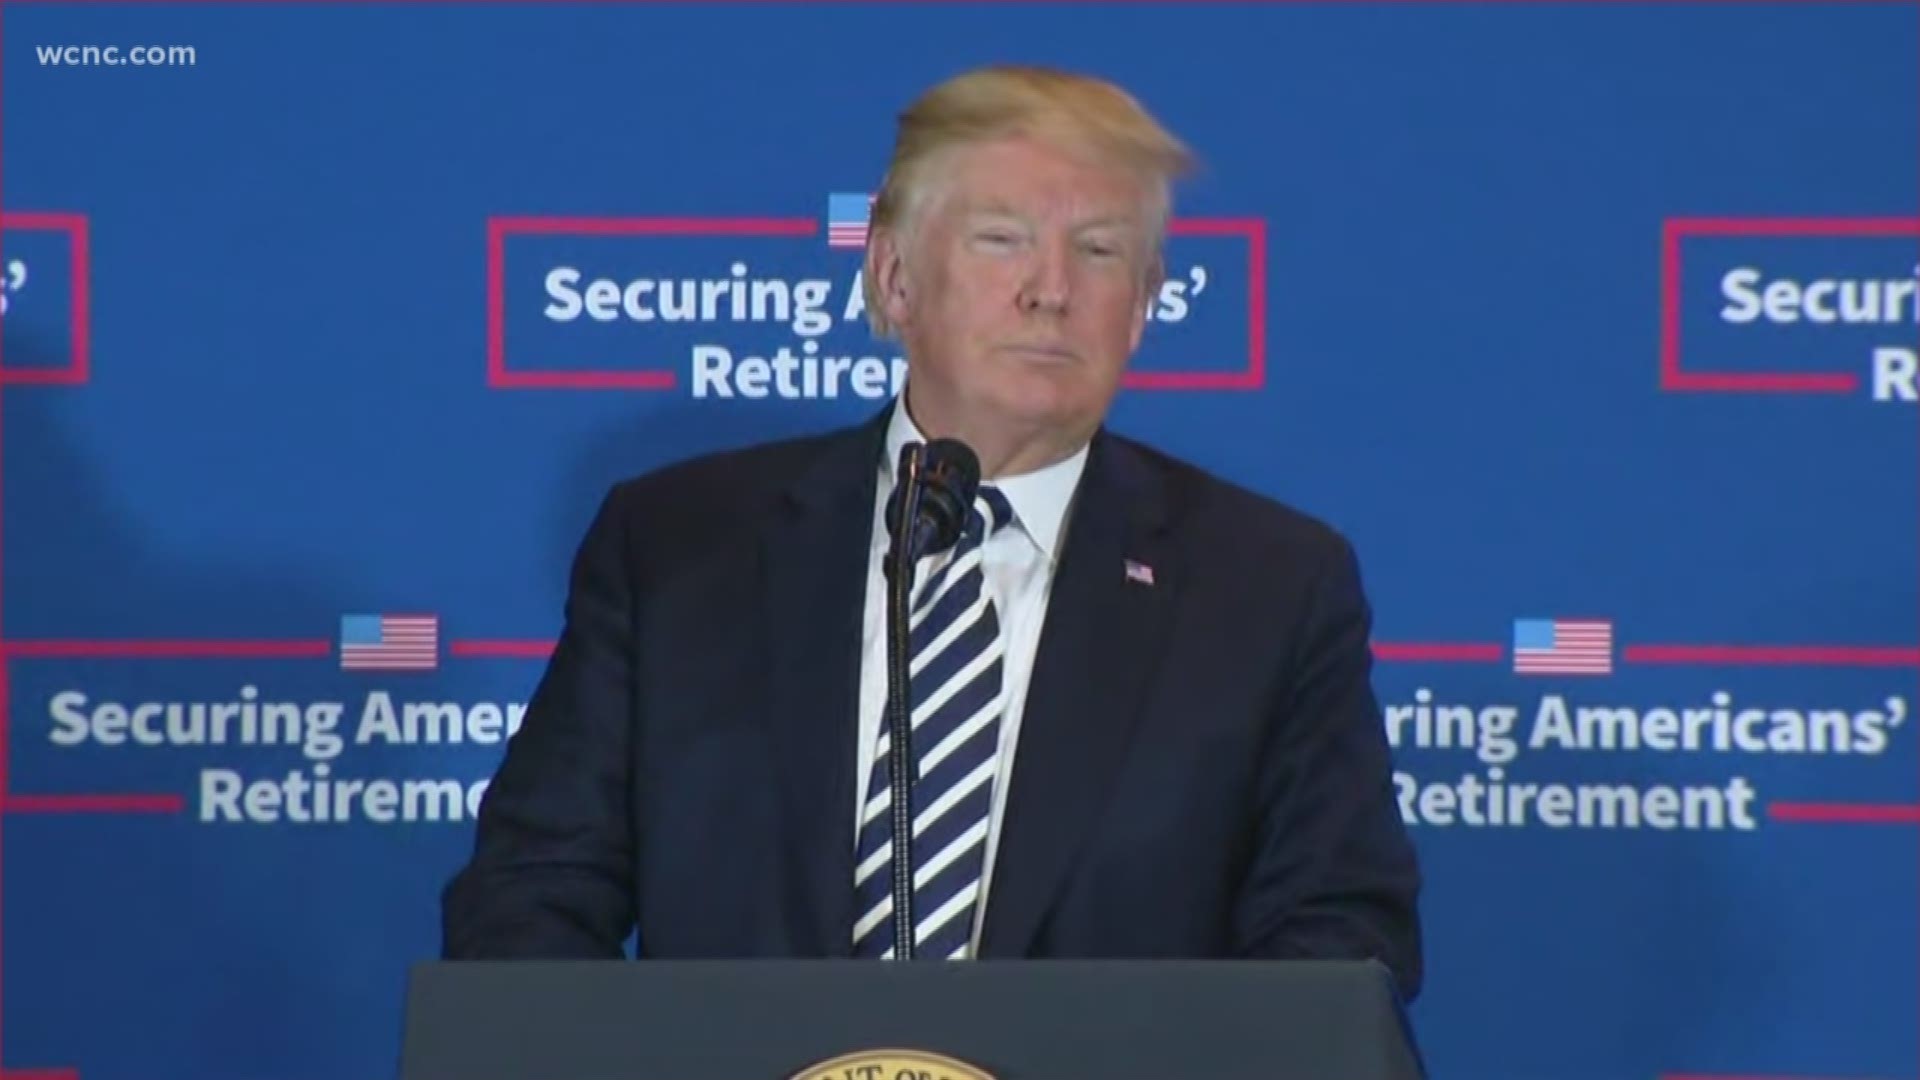 President Trump speaks at CPCC Harris Conference Center